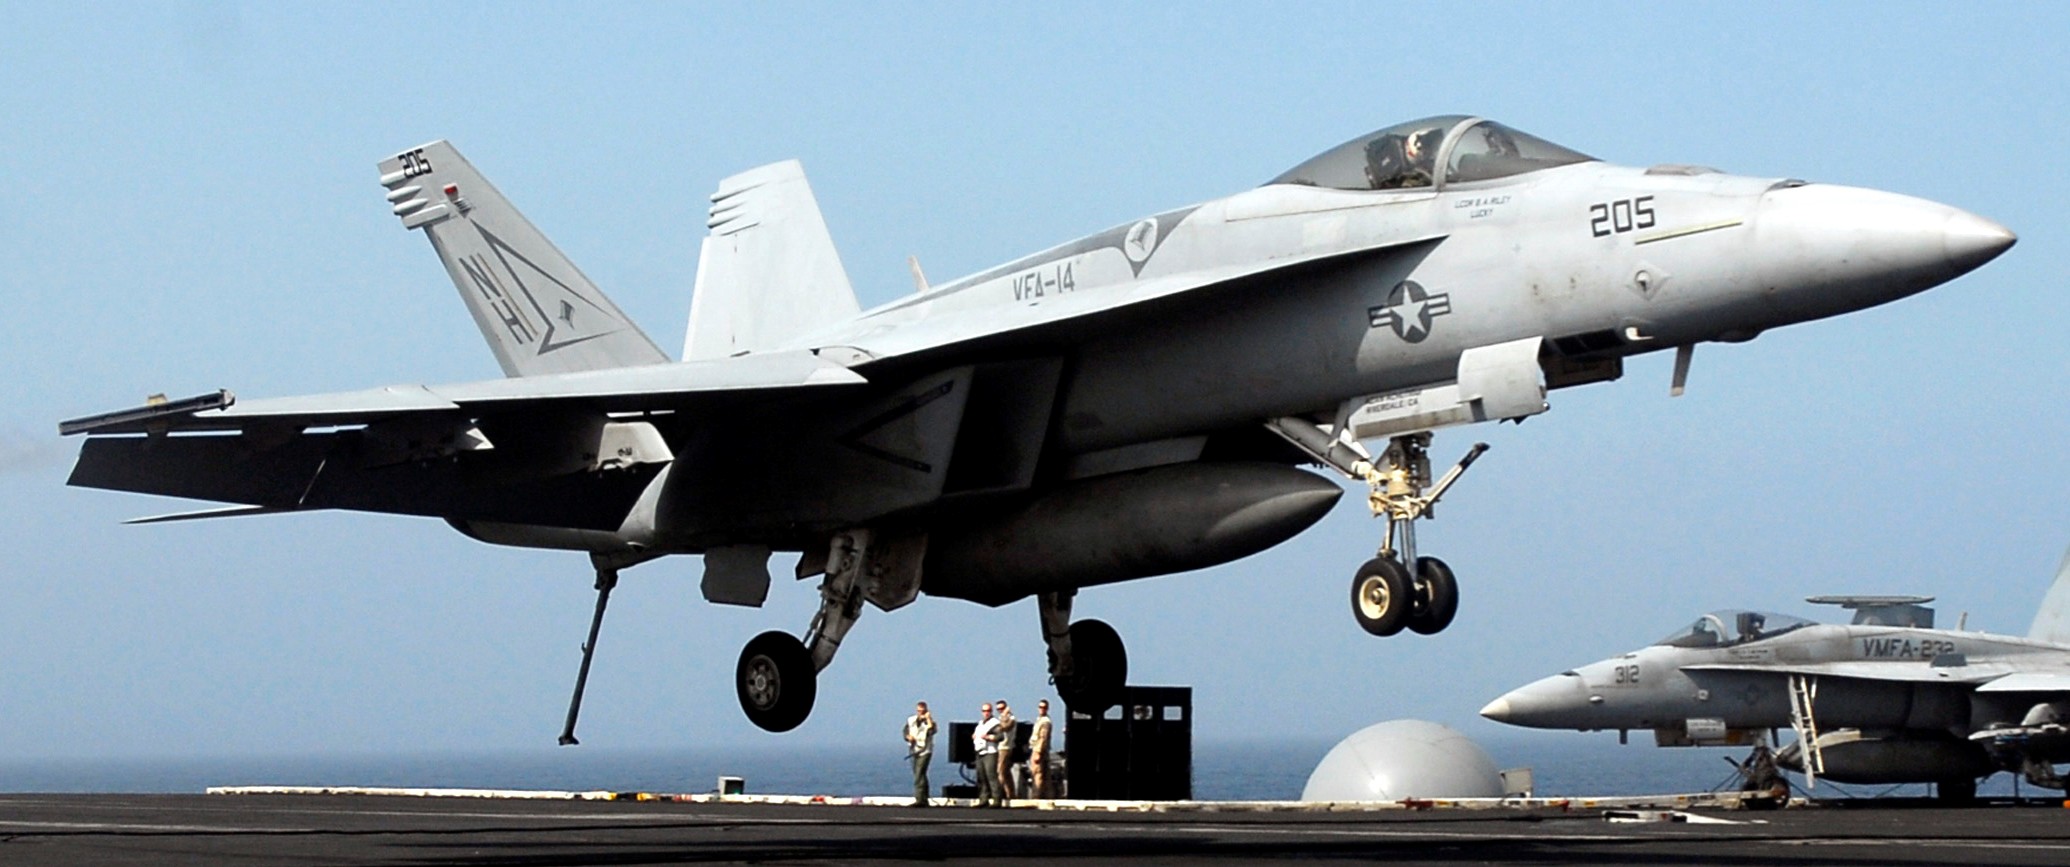 vfa-14 tophatters f/a-18e super hornet